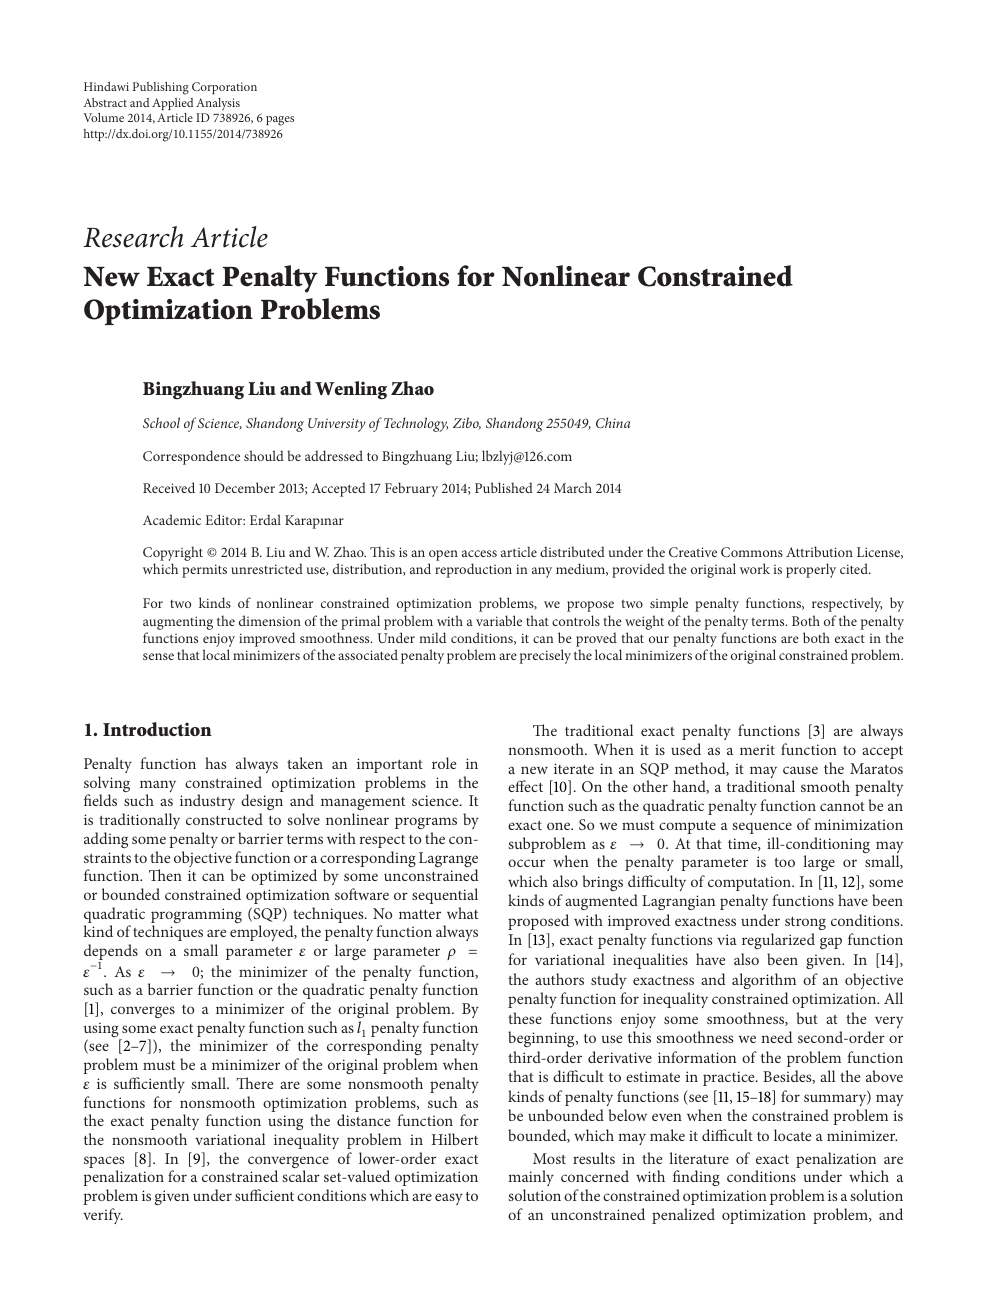 New Exact Penalty Functions For Nonlinear Constrained Optimization Problems Topic Of Research Paper In Mathematics Download Scholarly Article Pdf And Read For Free On Cyberleninka Open Science Hub